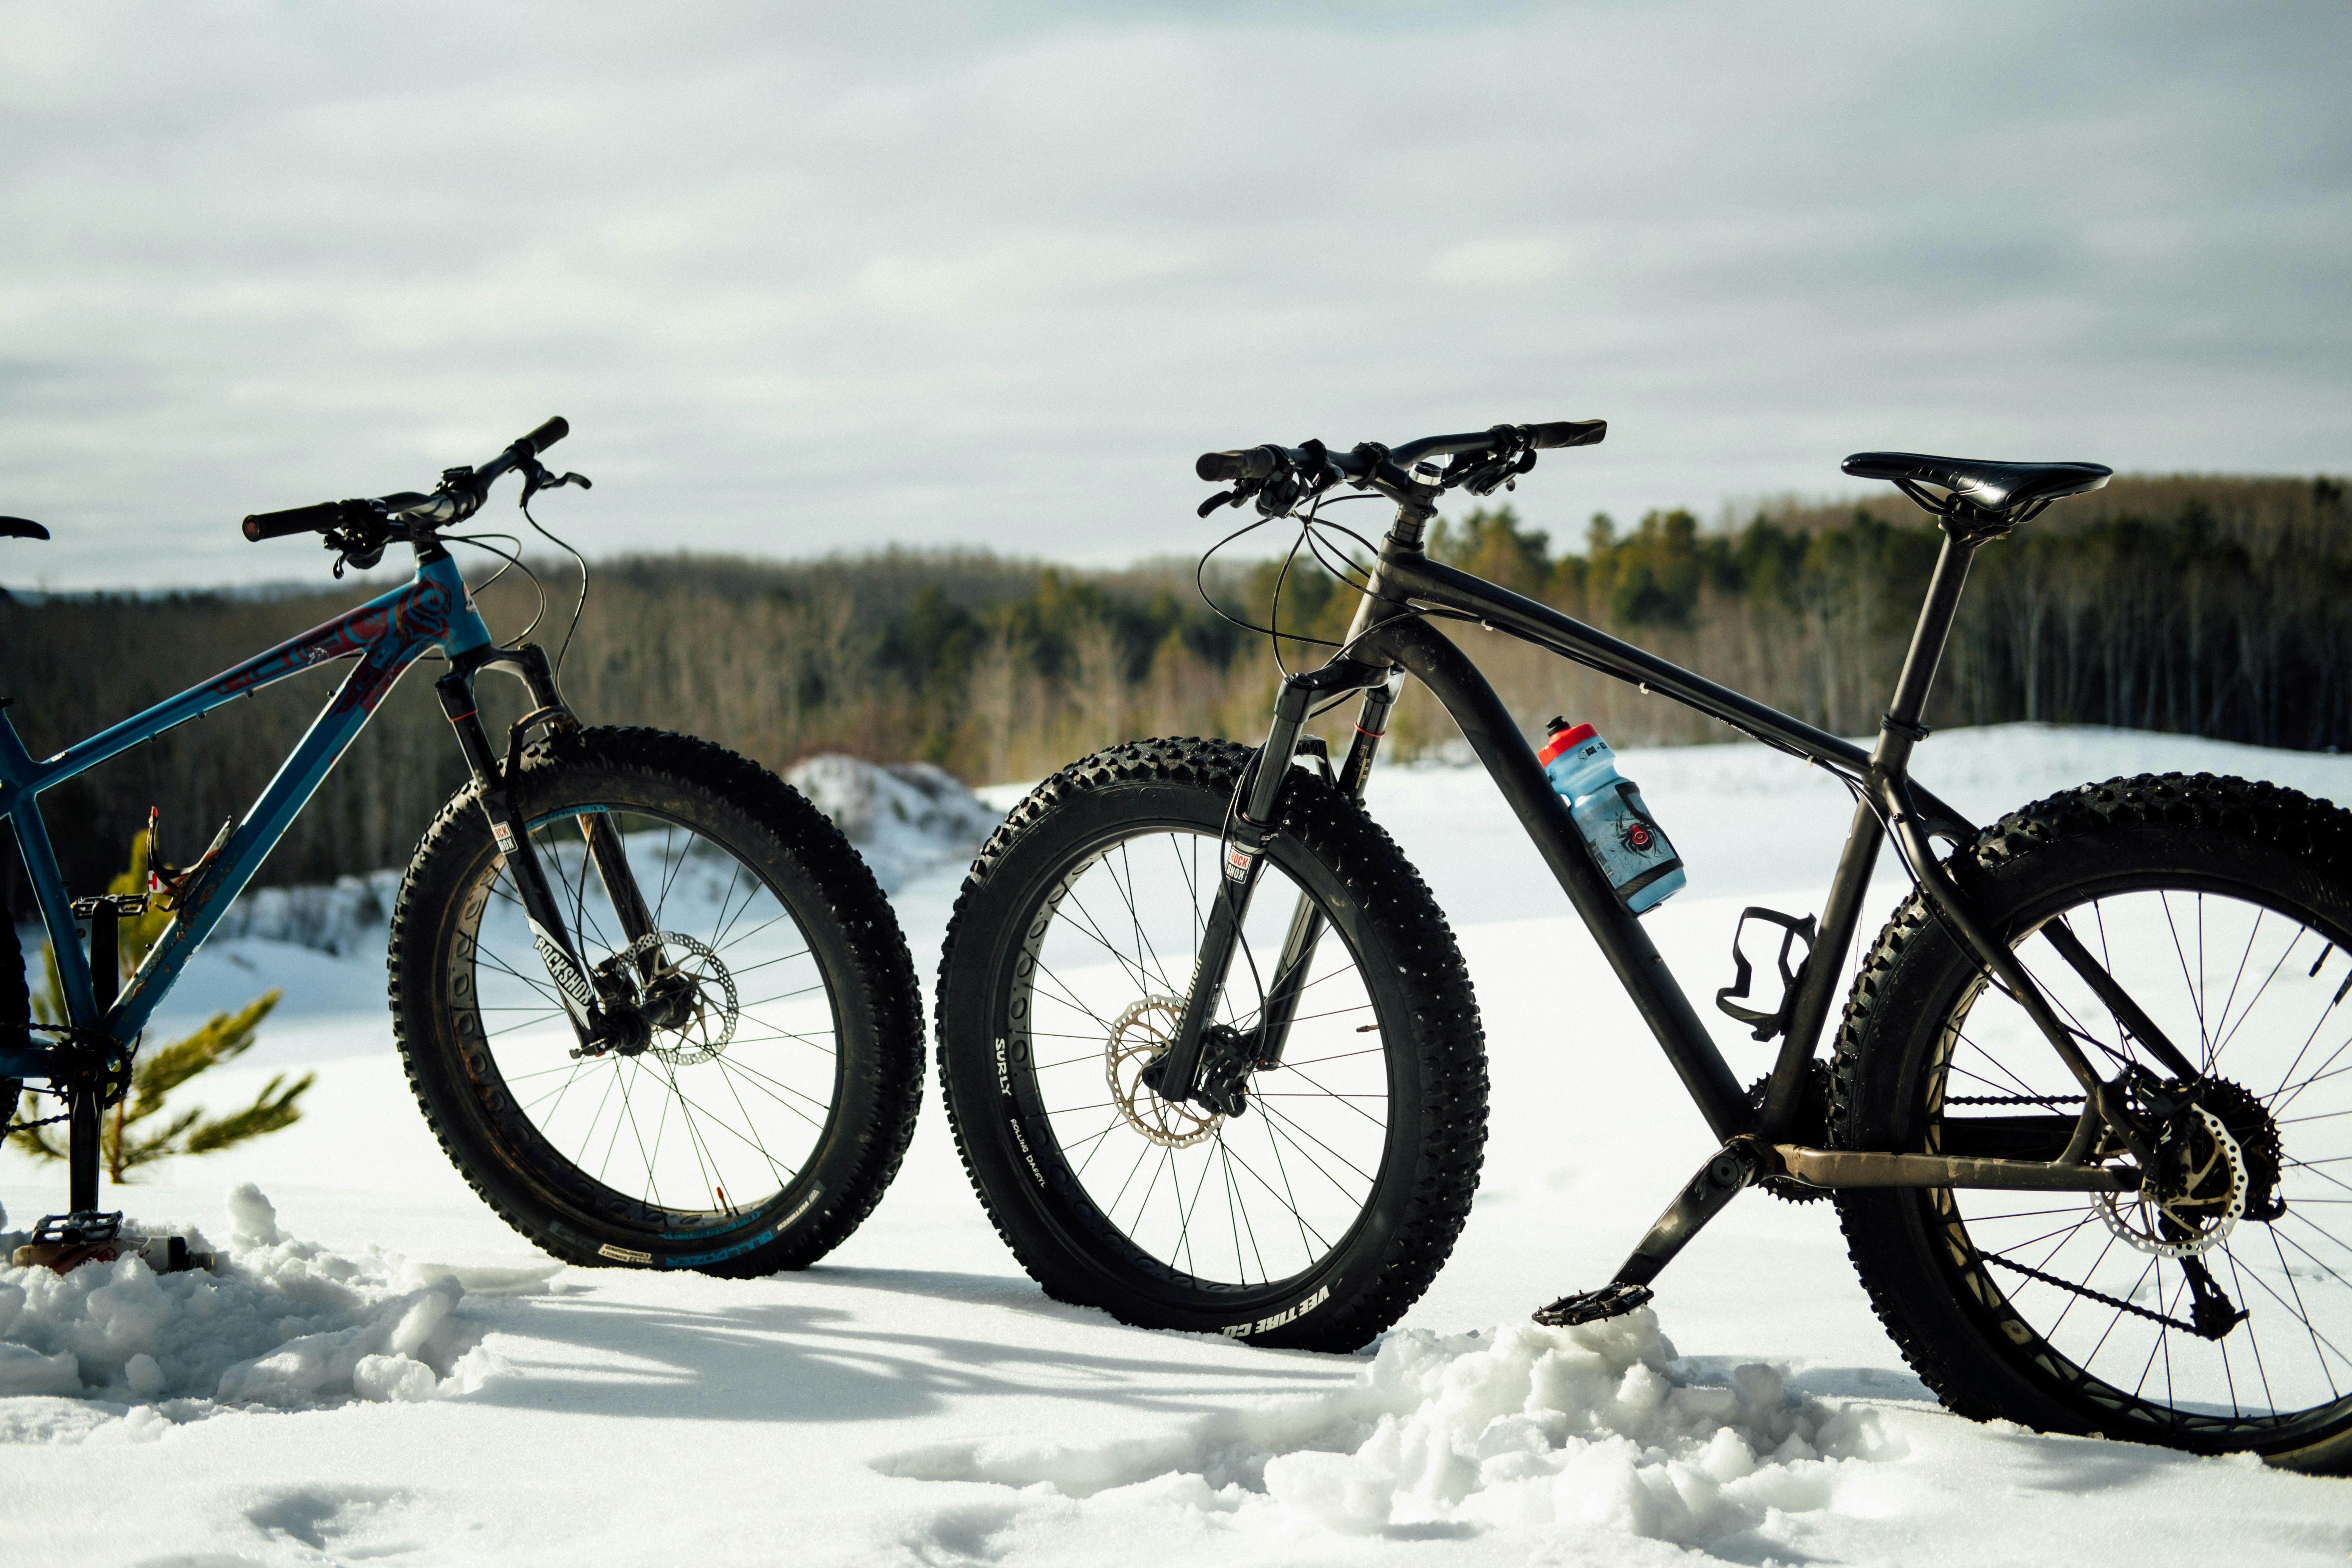 Two fat tire bikes in the snow.